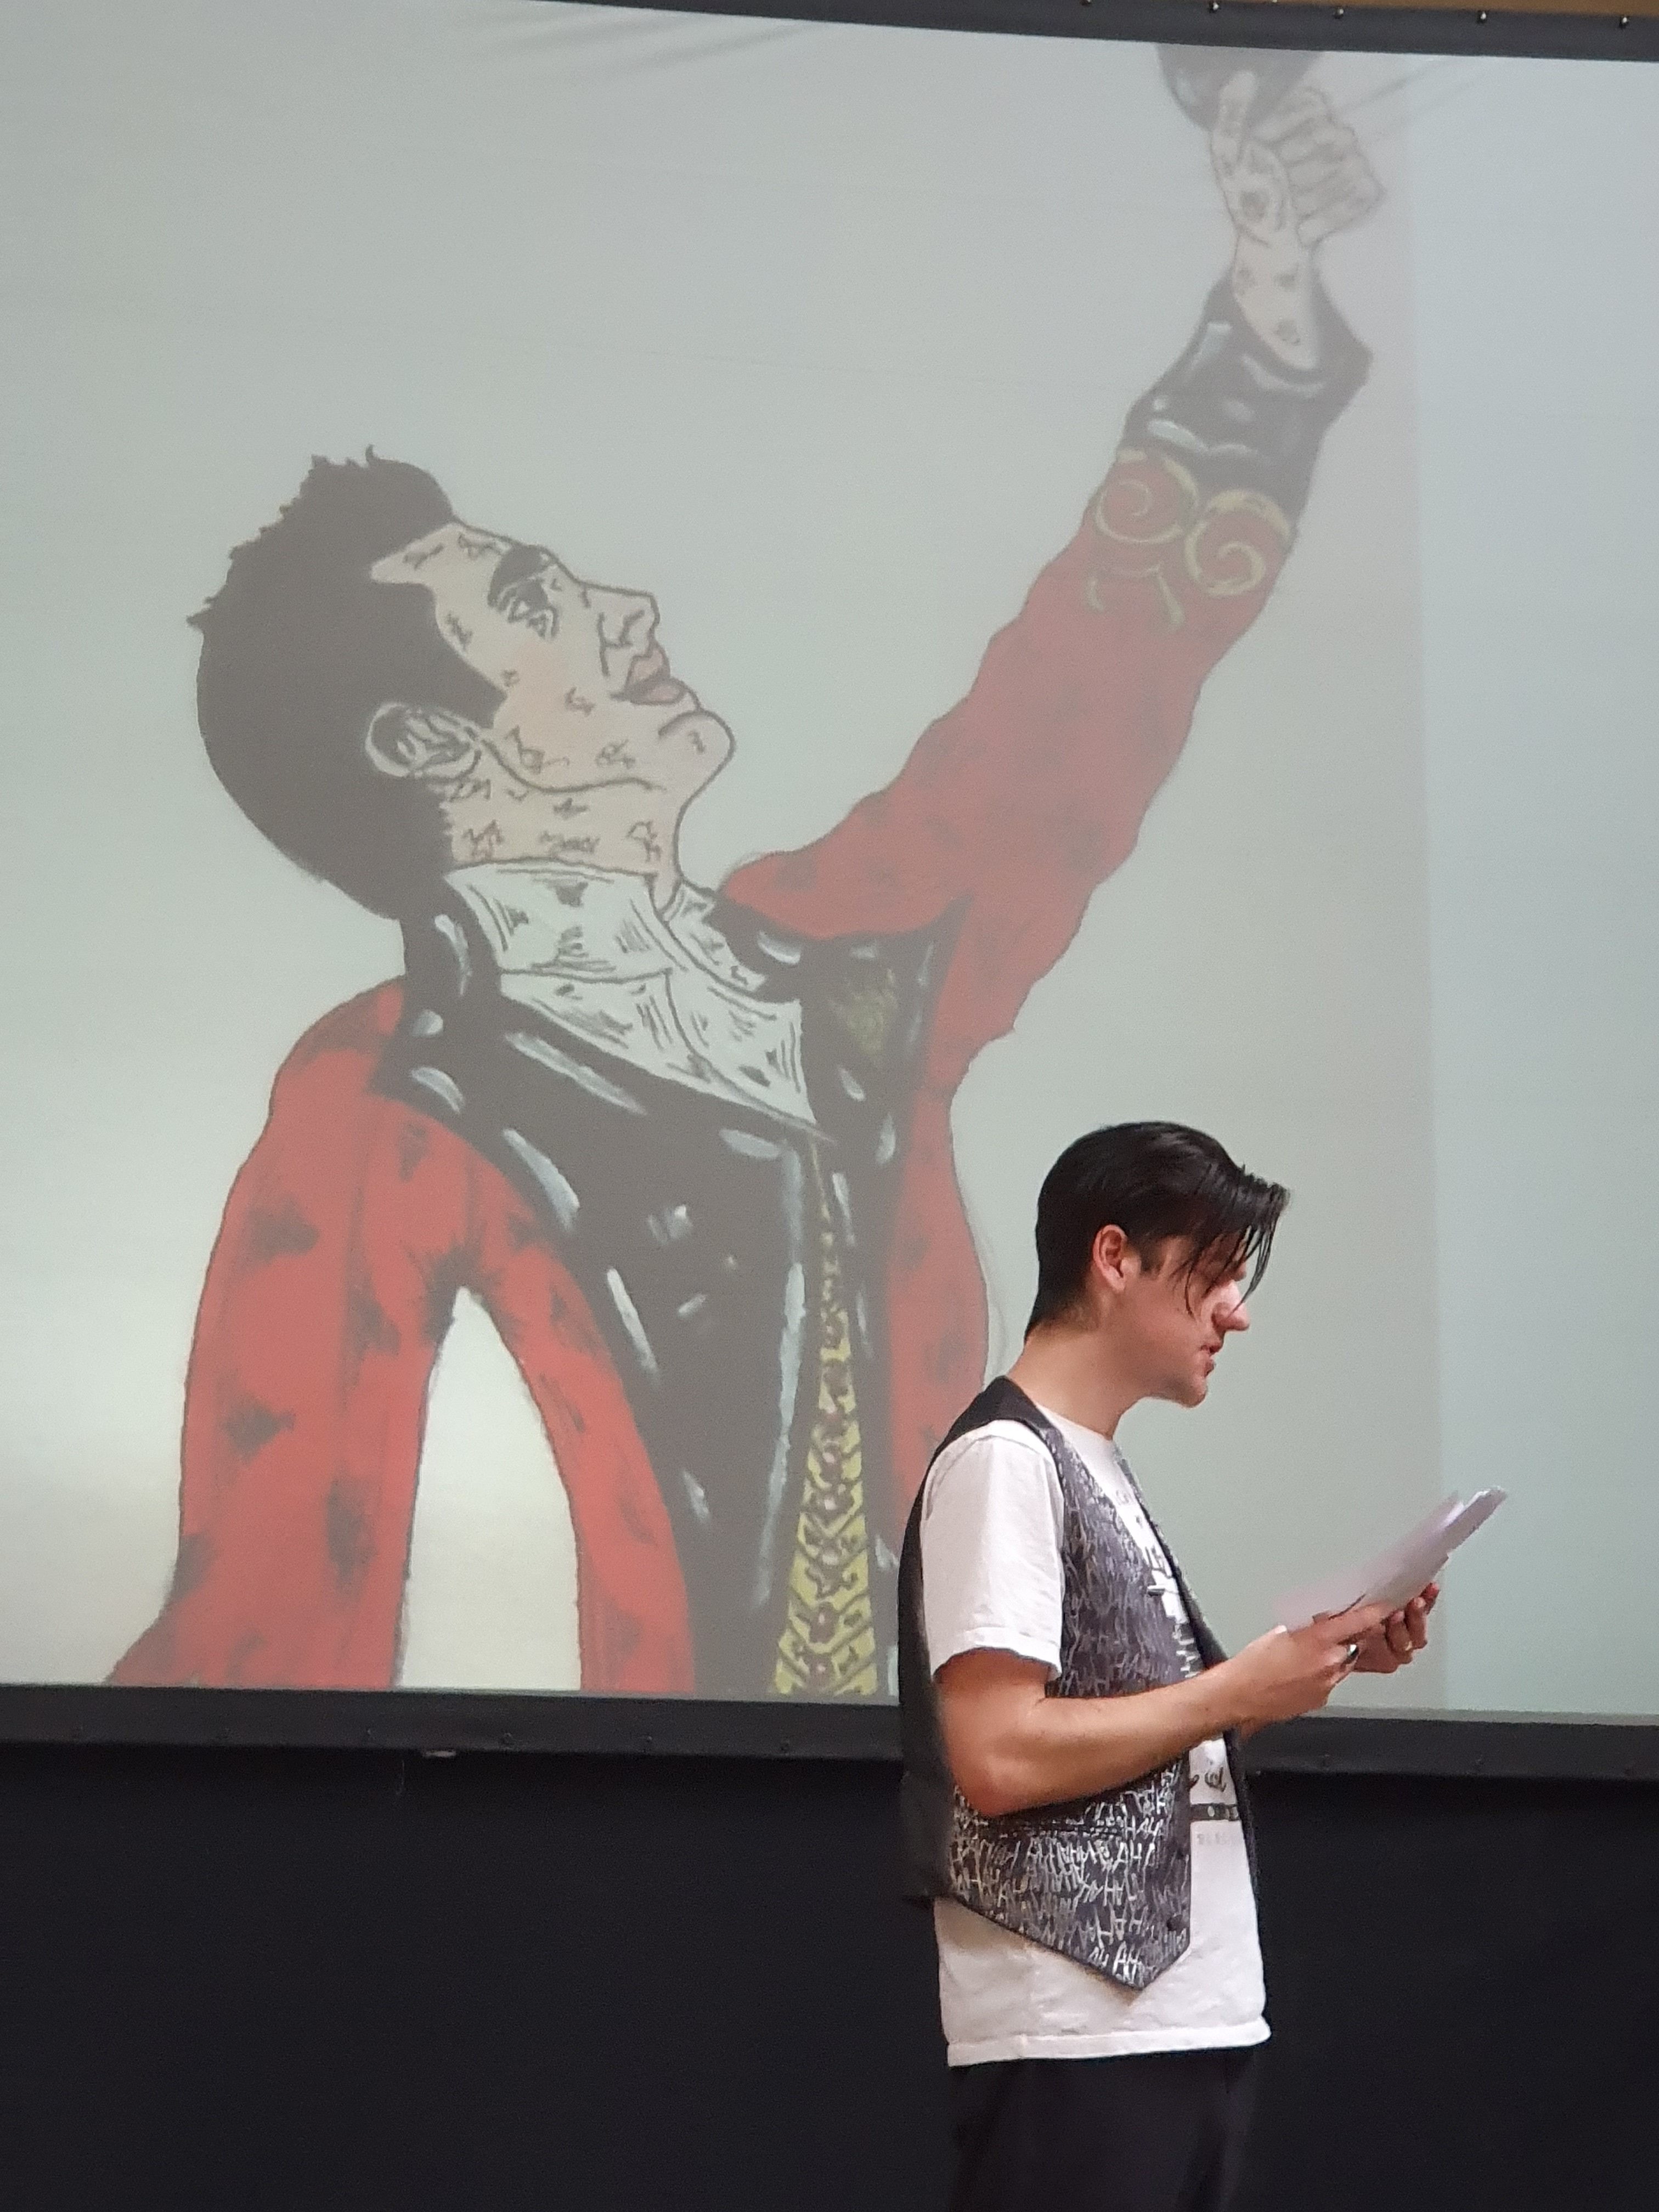 A coloured photograph of a man standing side profile reading from a piece of paper, perhaps addressing an audience that we cannot see. There is a large projection directly behind the man of an illustration of a man also in side profile.